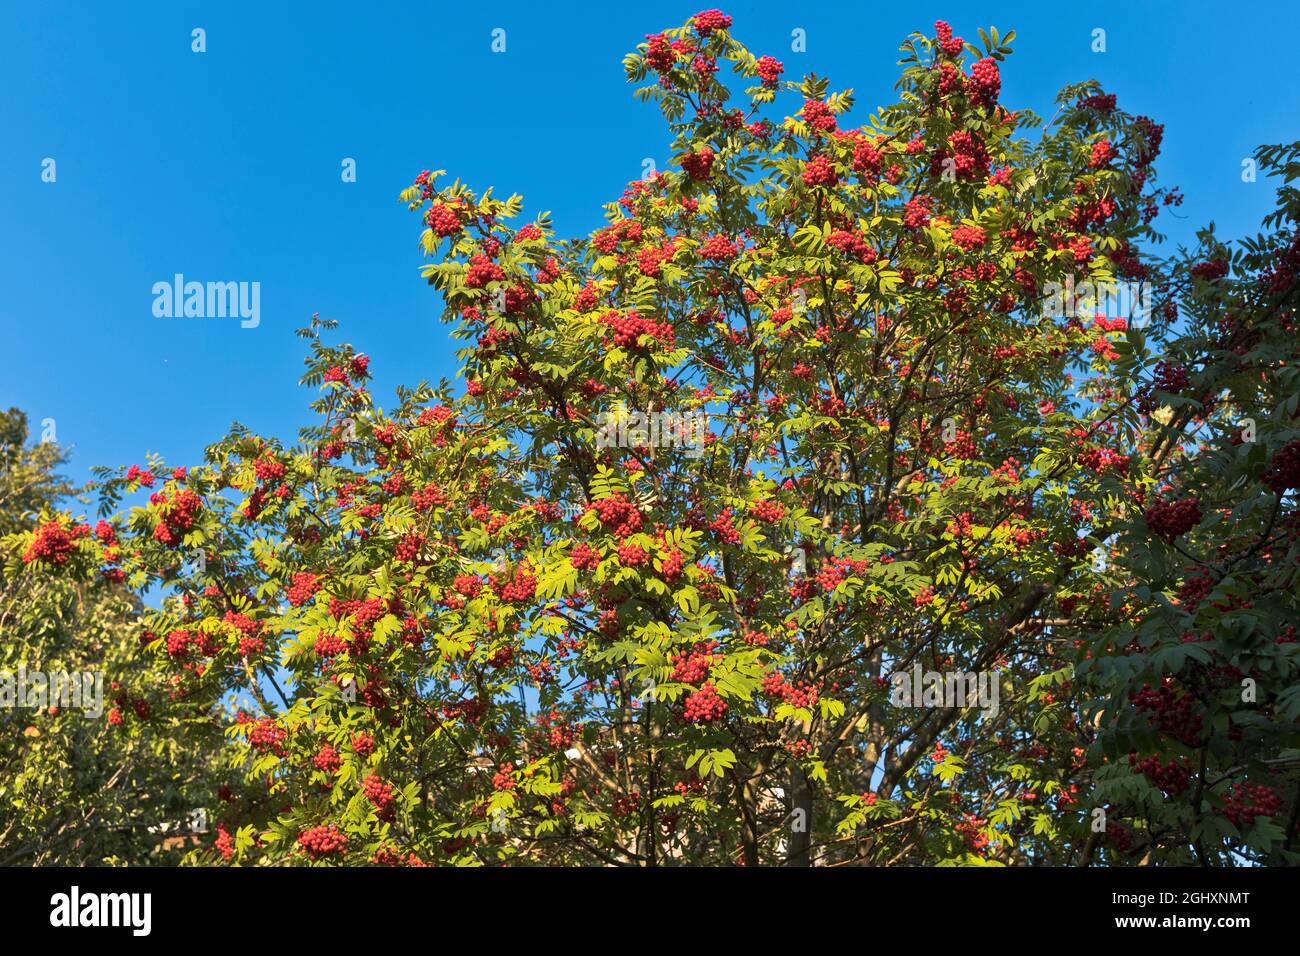 dh Red fruit ROWAN BERRY FLORA TREES Summer tree with berries scotland uk colour reds foliage leafy branch Stock Photo